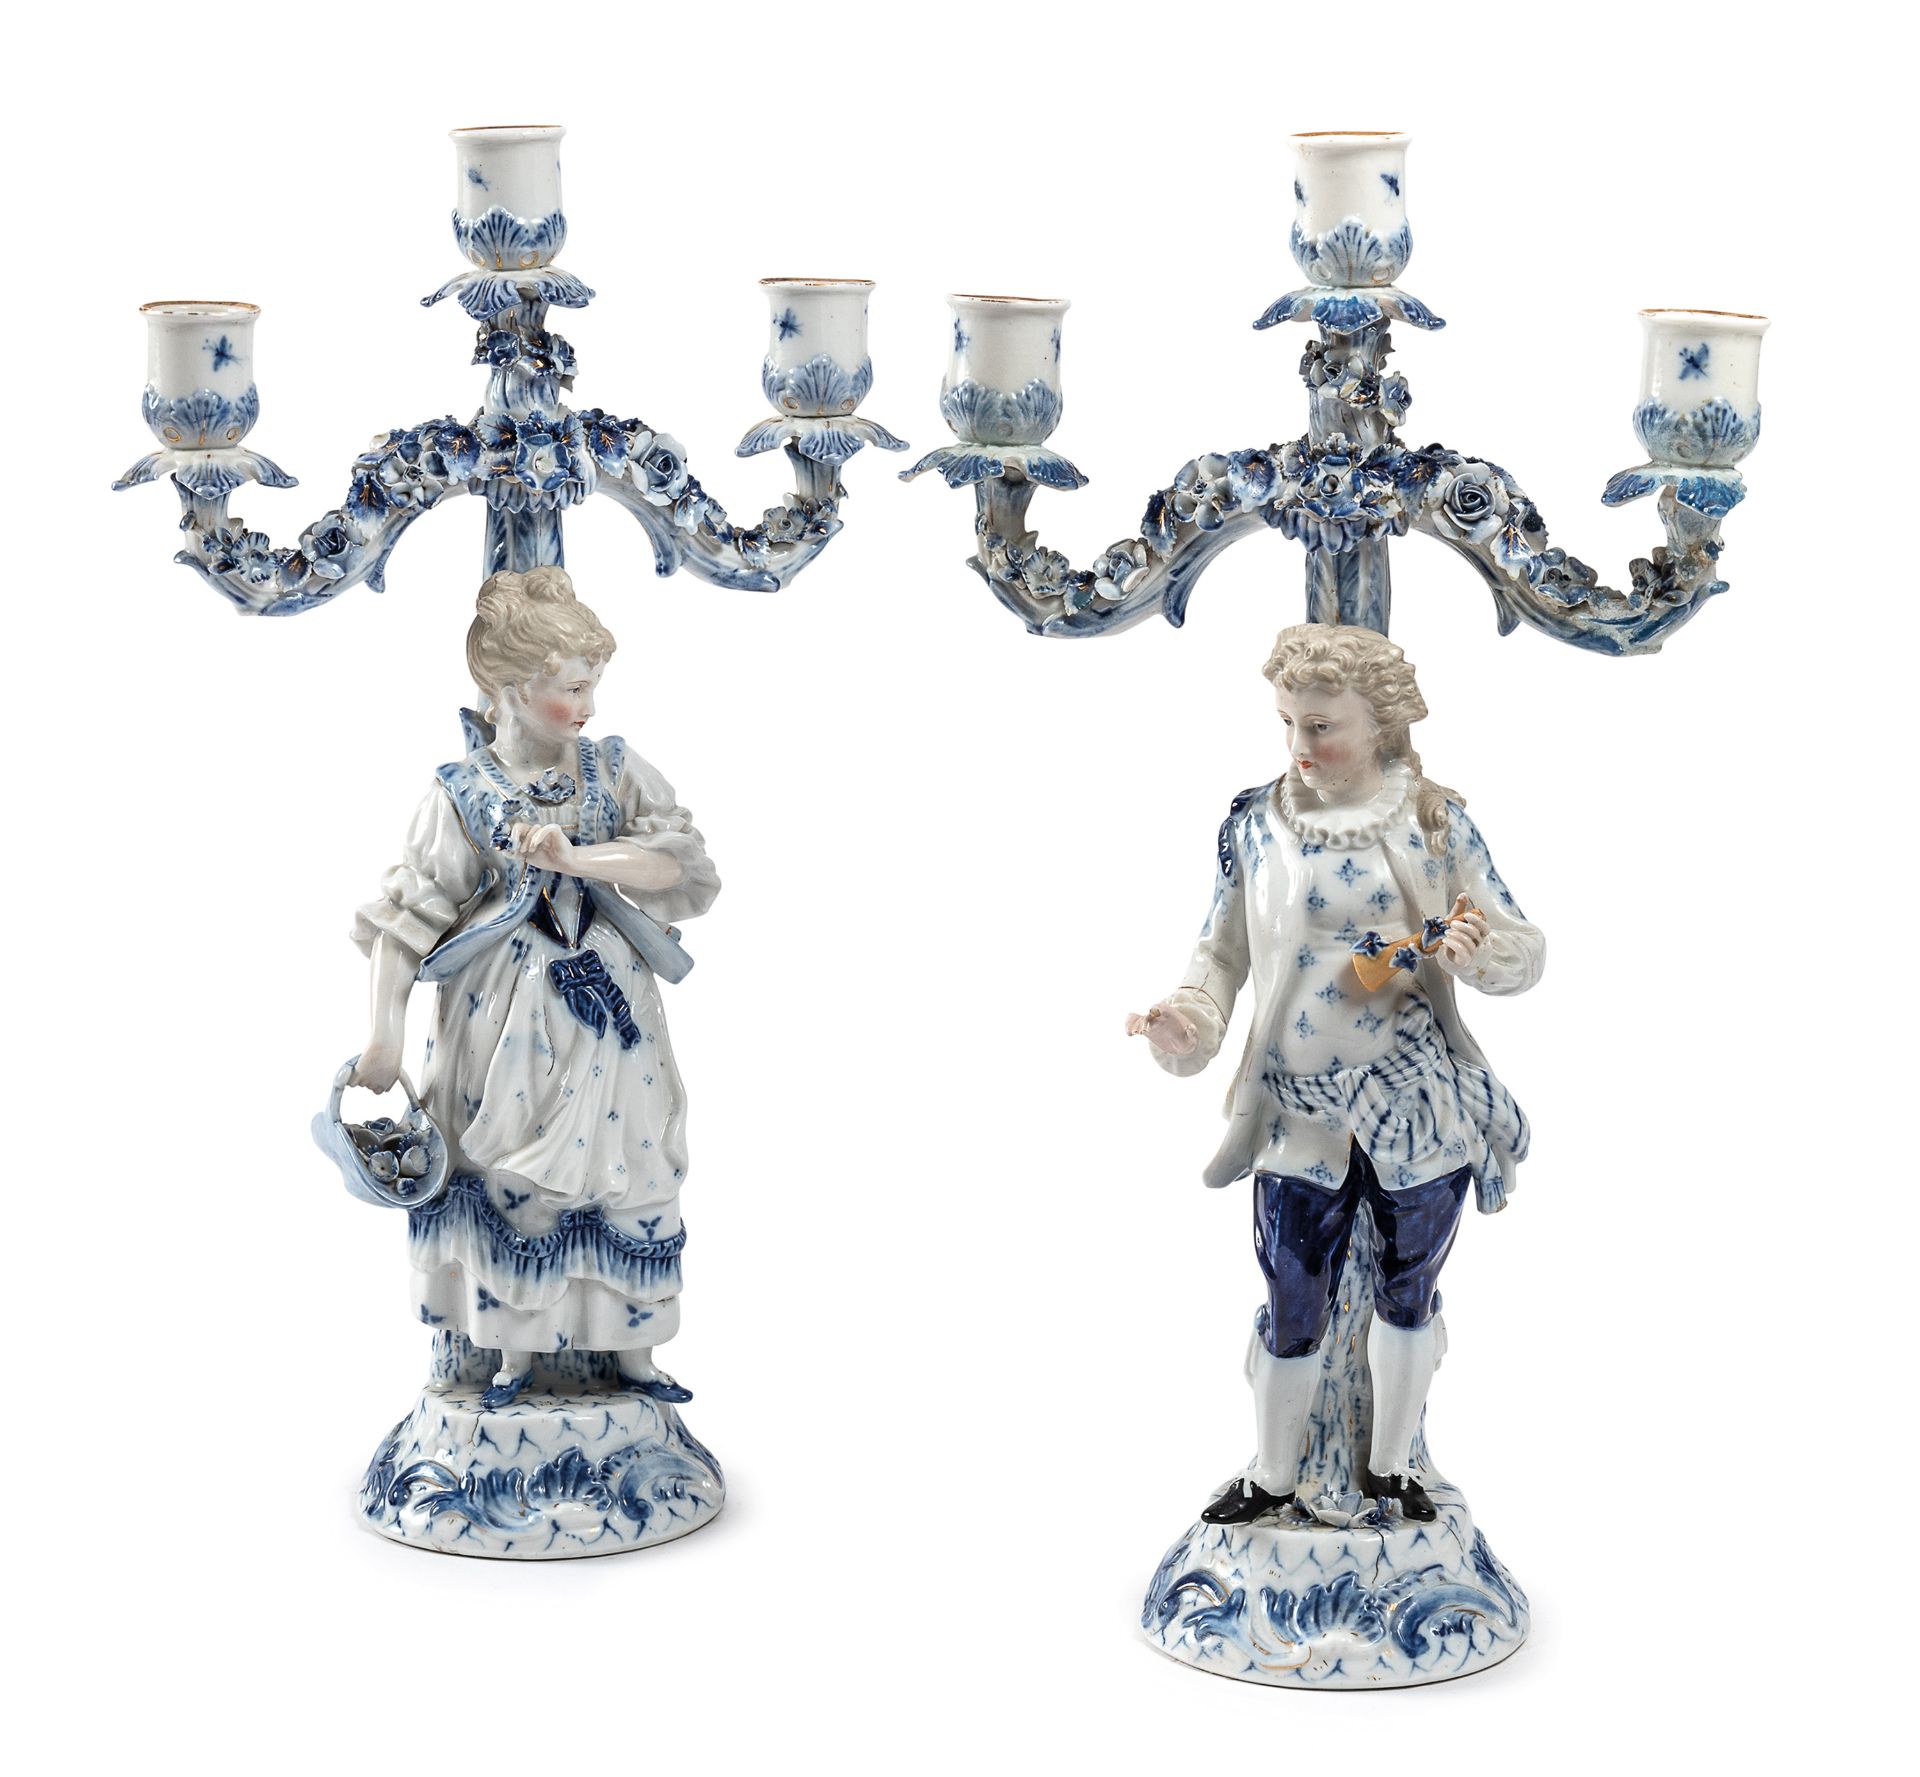 PAIR OF PORCELAIN CANDLESTICKS EARLY 20TH CENTURY